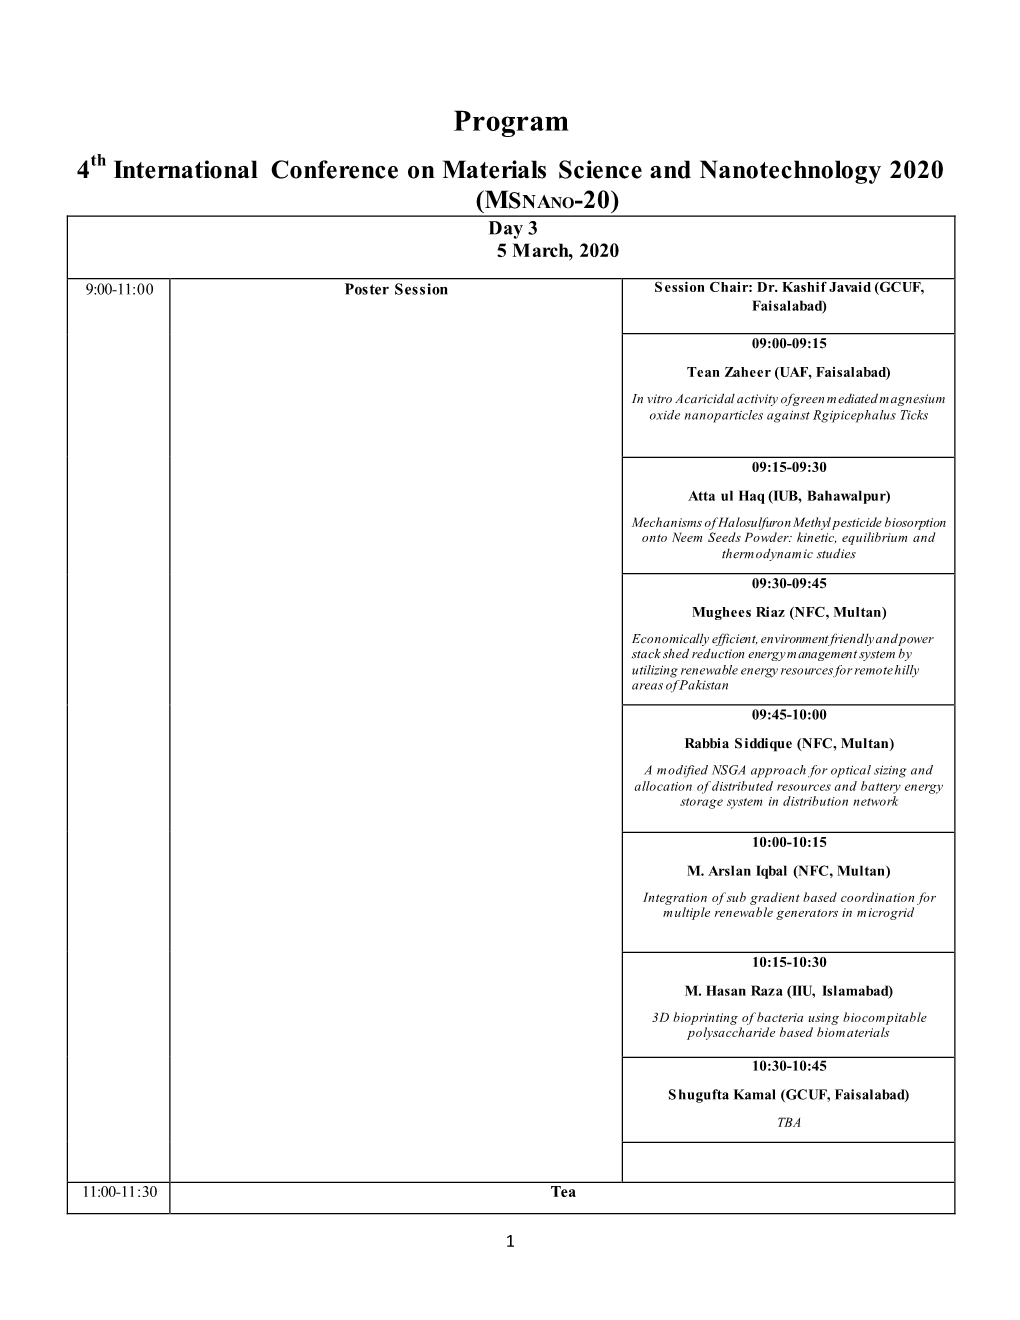 Program Th 4 International Conference on Materials Science and Nanotechnology 2020 (MSNANO-20) Day 3 5 March, 2020